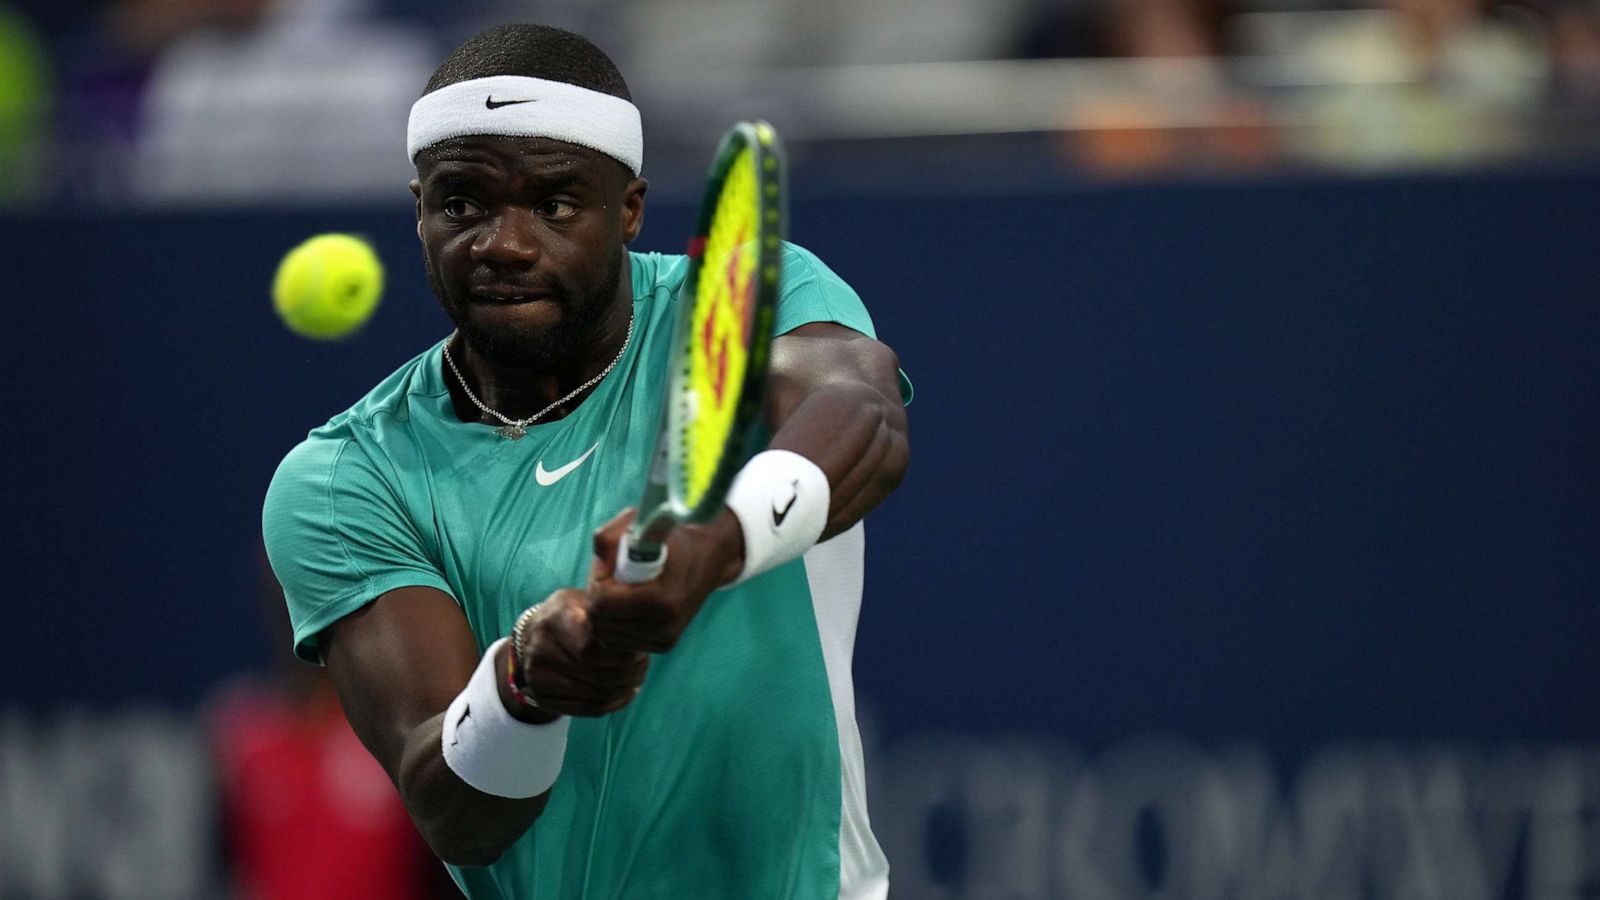 Frances Tiafoe to bring big energy back to the US Open, shares lesson he learned after Wimbledon